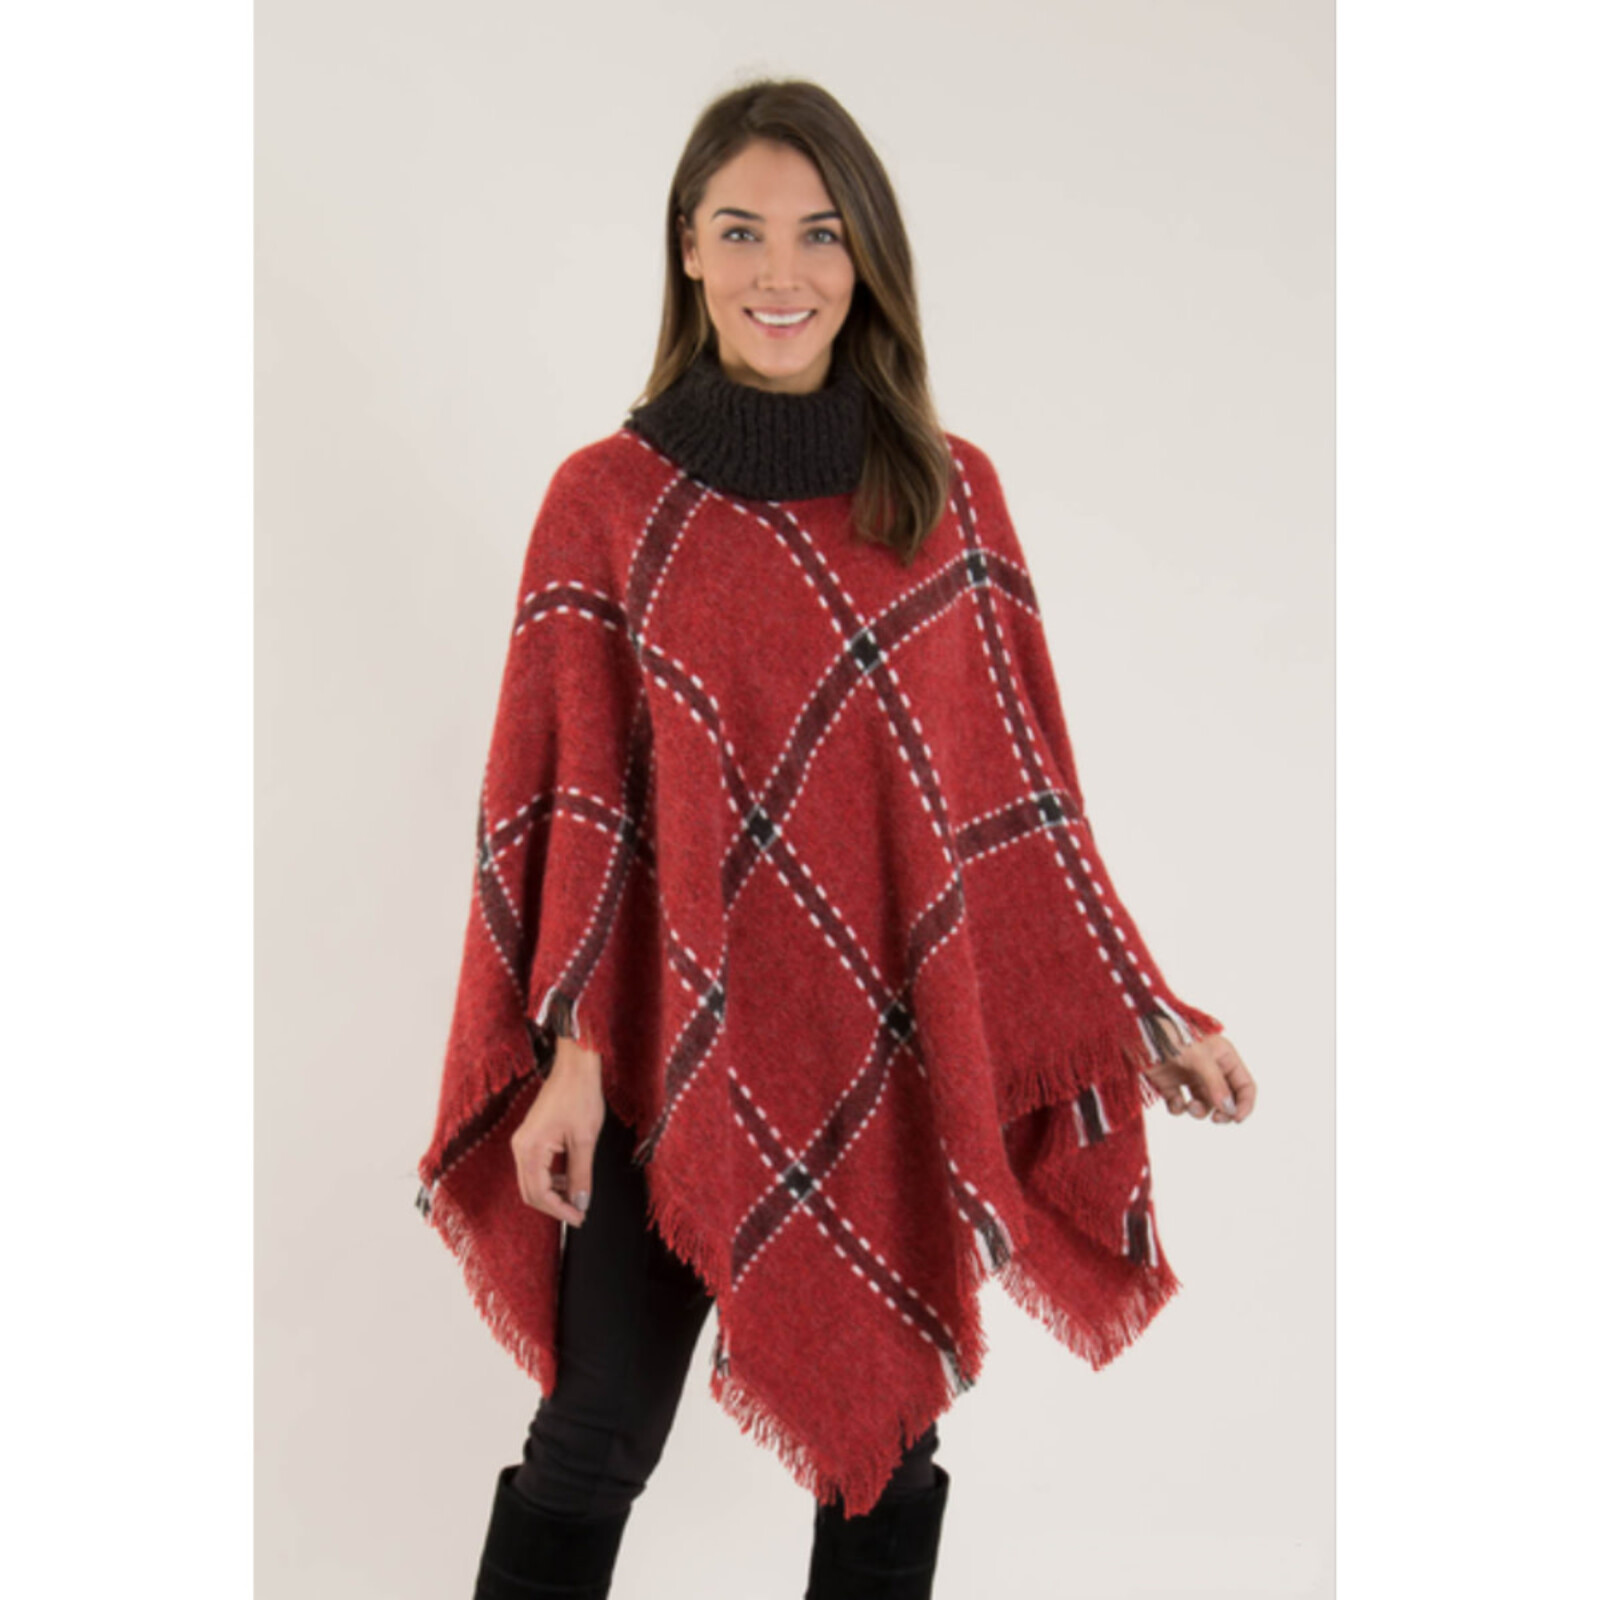 Simply Noelle Cowl Neck Stitched Plaid Poncho - Red      PNCH8006R loading=